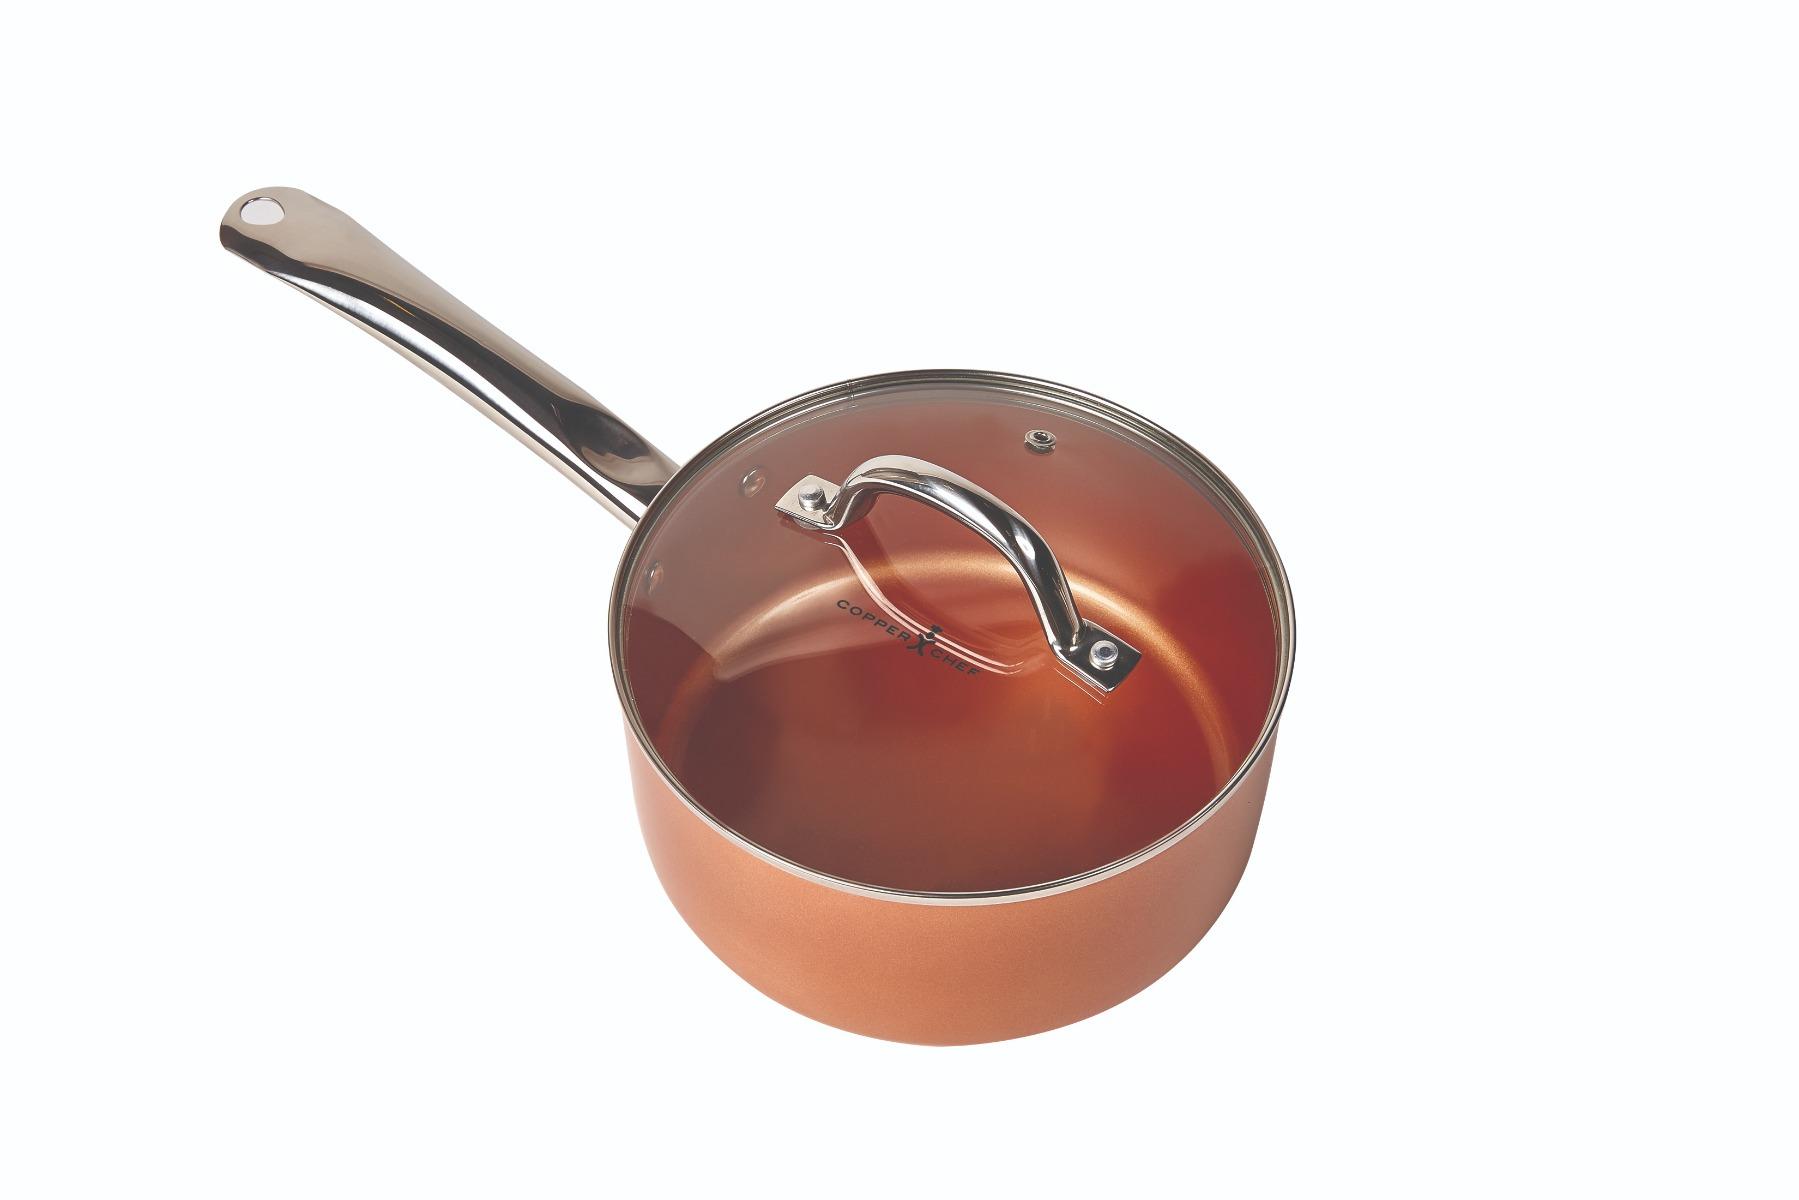 copperchef Copper Chef Sauce Pan With Lid, 6.5 Inch, 540-900110